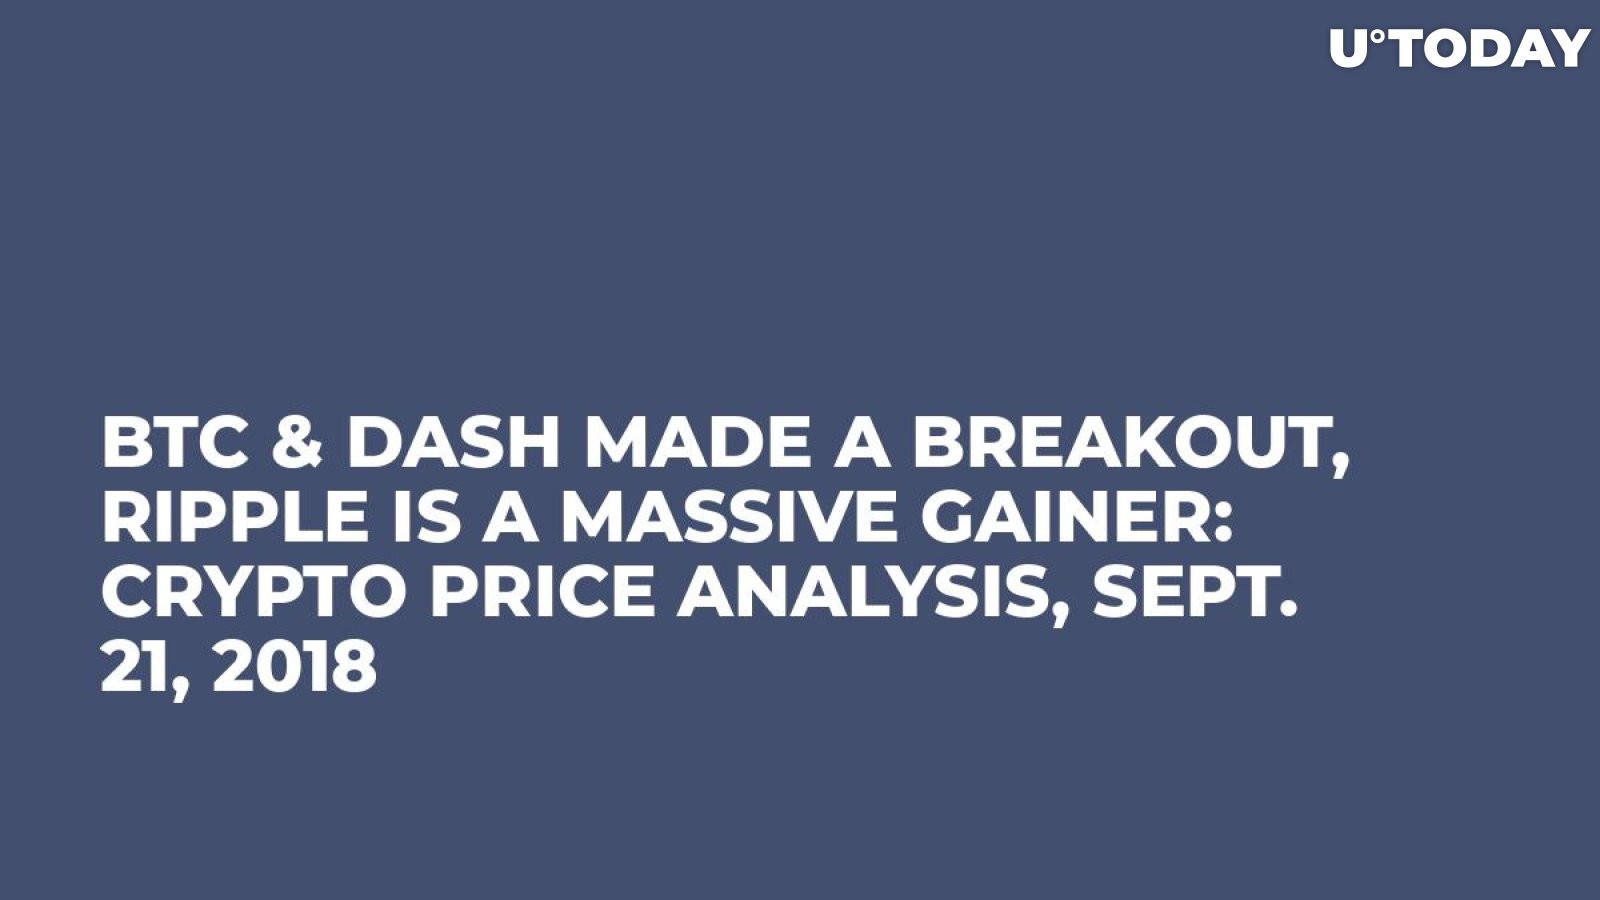 BTC & Dash Made a Breakout, Ripple Is a Massive Gainer: Crypto Price Analysis, Sept. 21, 2018